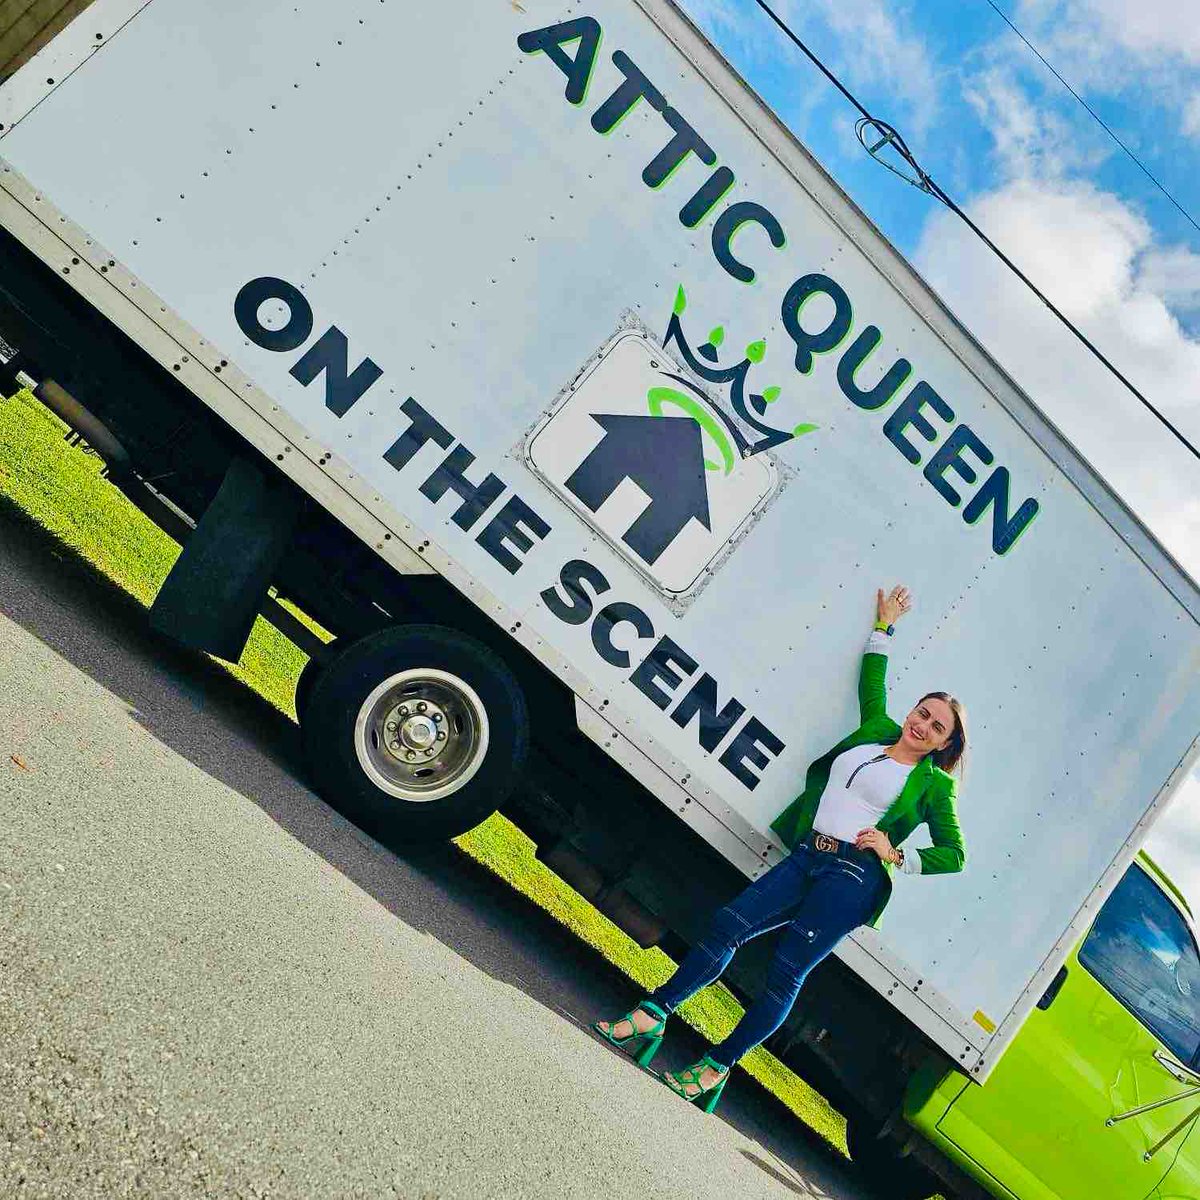 The journey to find out who I was meant to be took some twists and turns but man am I glad to have found it! 
#atticqueen #onthescene #womenintrades #womeninconstruction #insulation #insulationcontractor #bpicertified #unstoppable #inspiringwomen #thebestisyettocome #attic #work